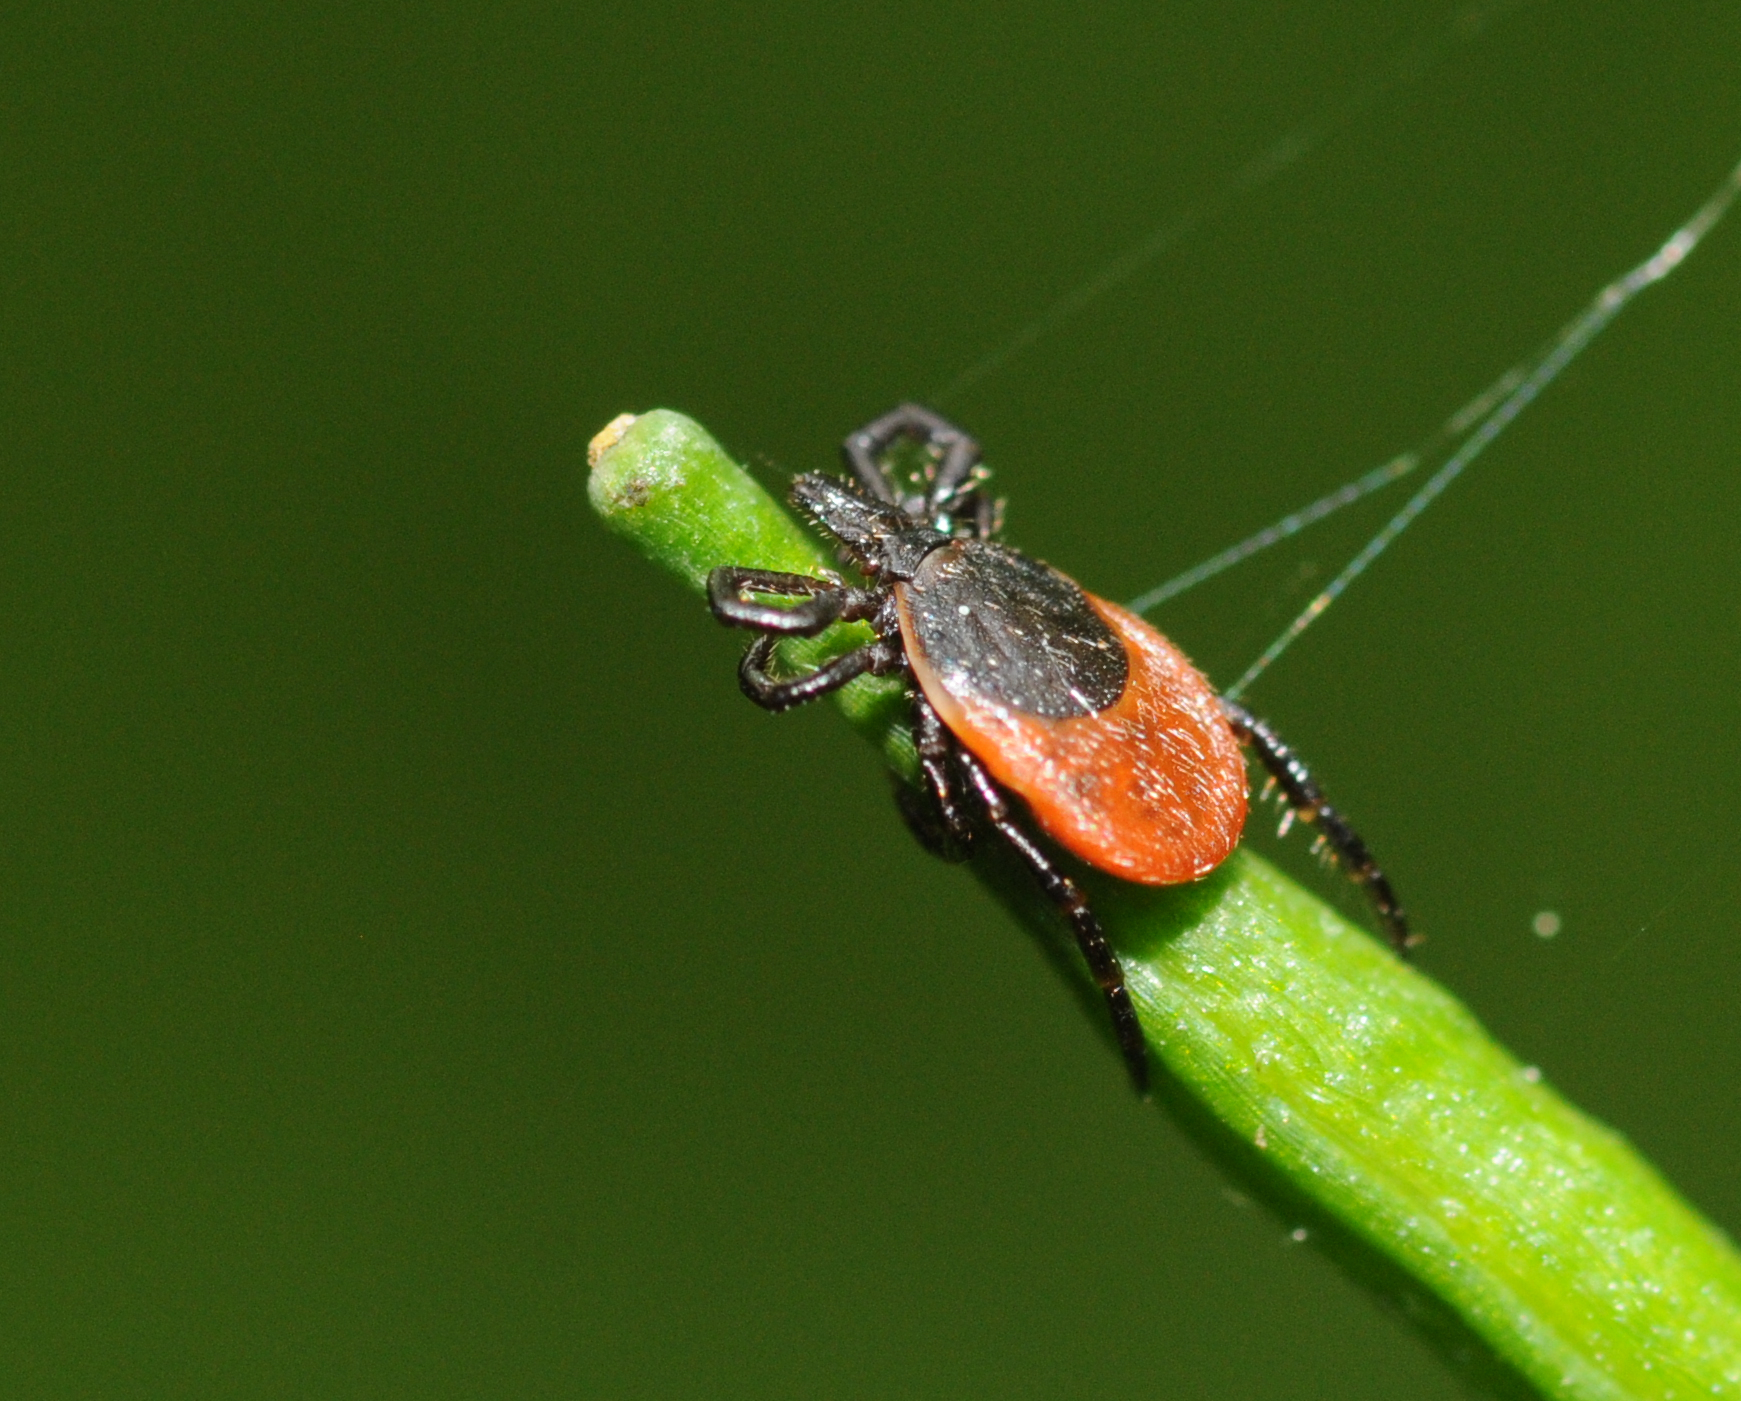 the spider and the red bug are on the top of a green plant